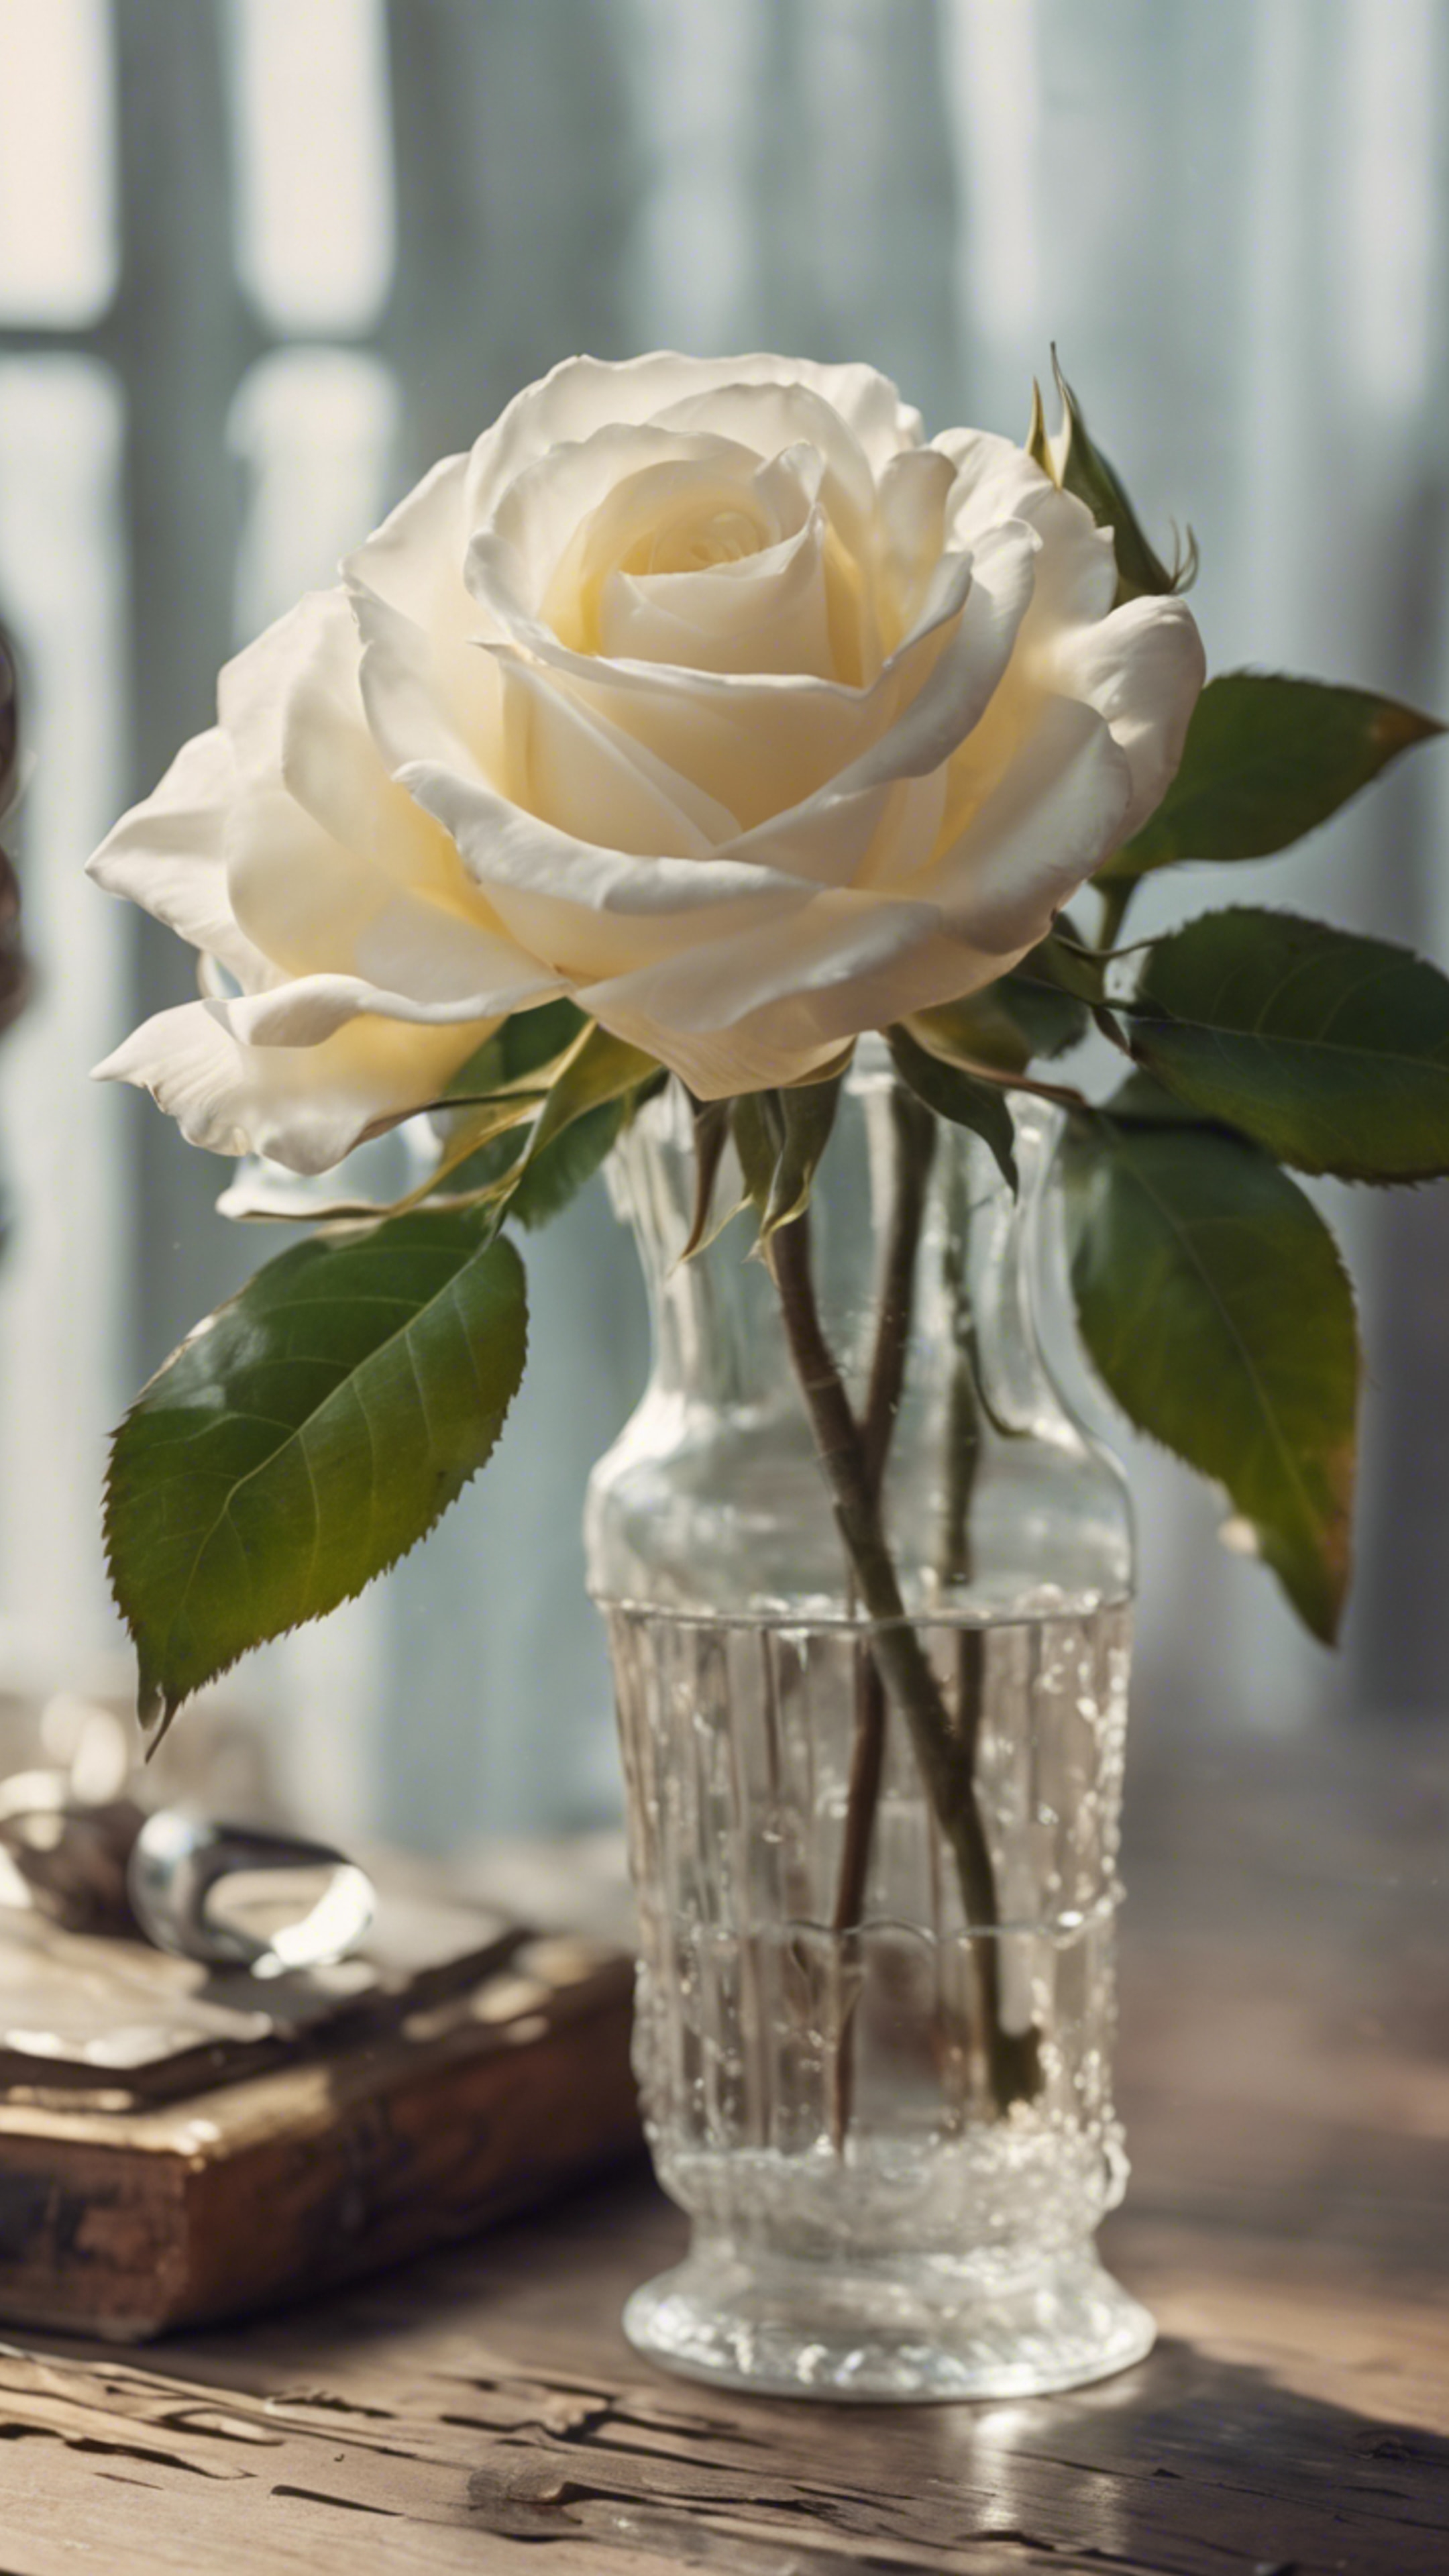 A soft white rose in a vintage glass vase on an antique wooden table. Шпалери[fc4486b9e2ee4669bbfe]